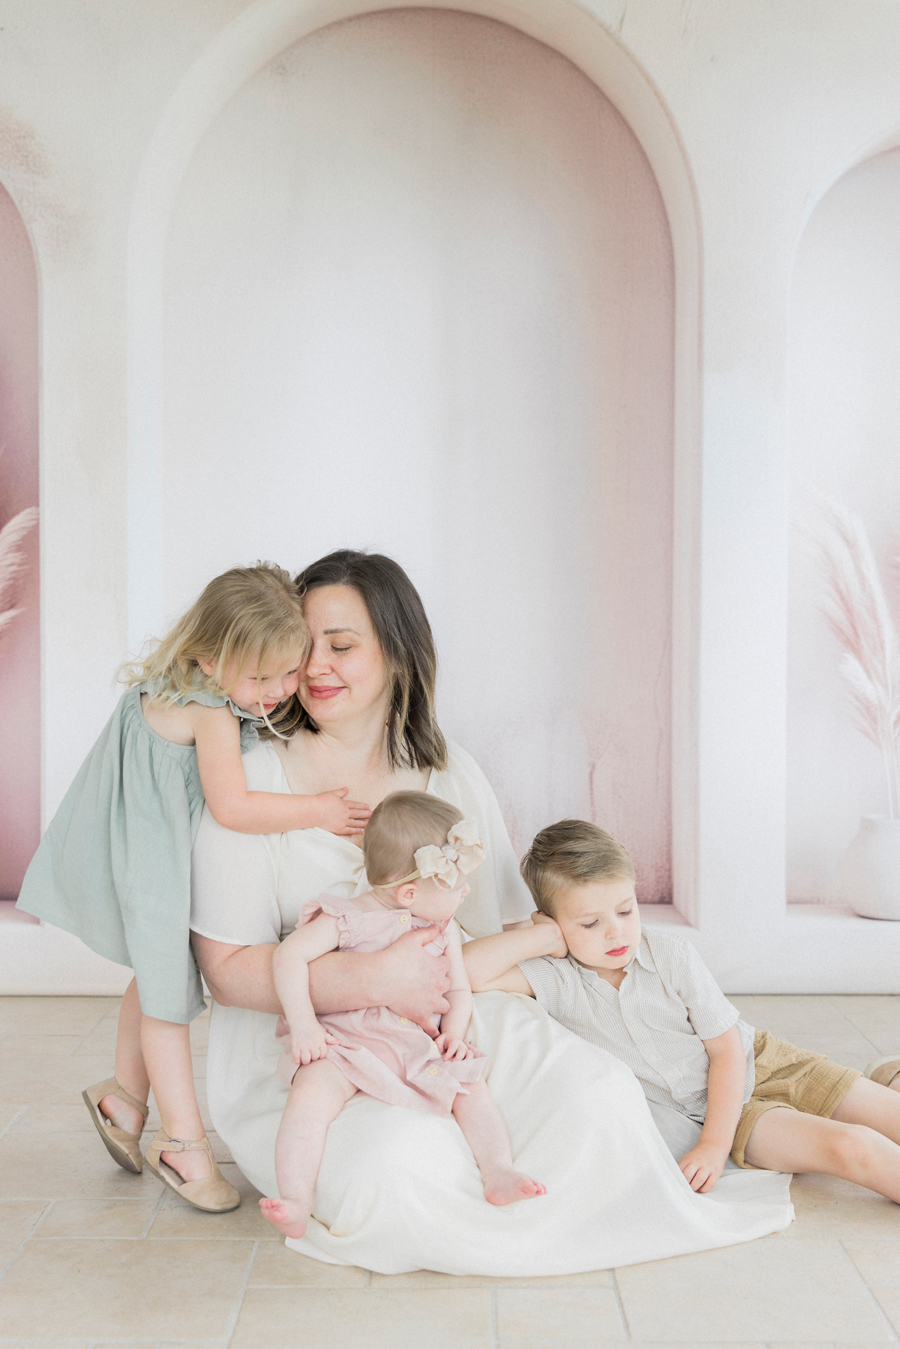 A beautiful mother poses with her three children for a motherhood mini session by Columbia, Missouri family photographer Love Tree Studios.